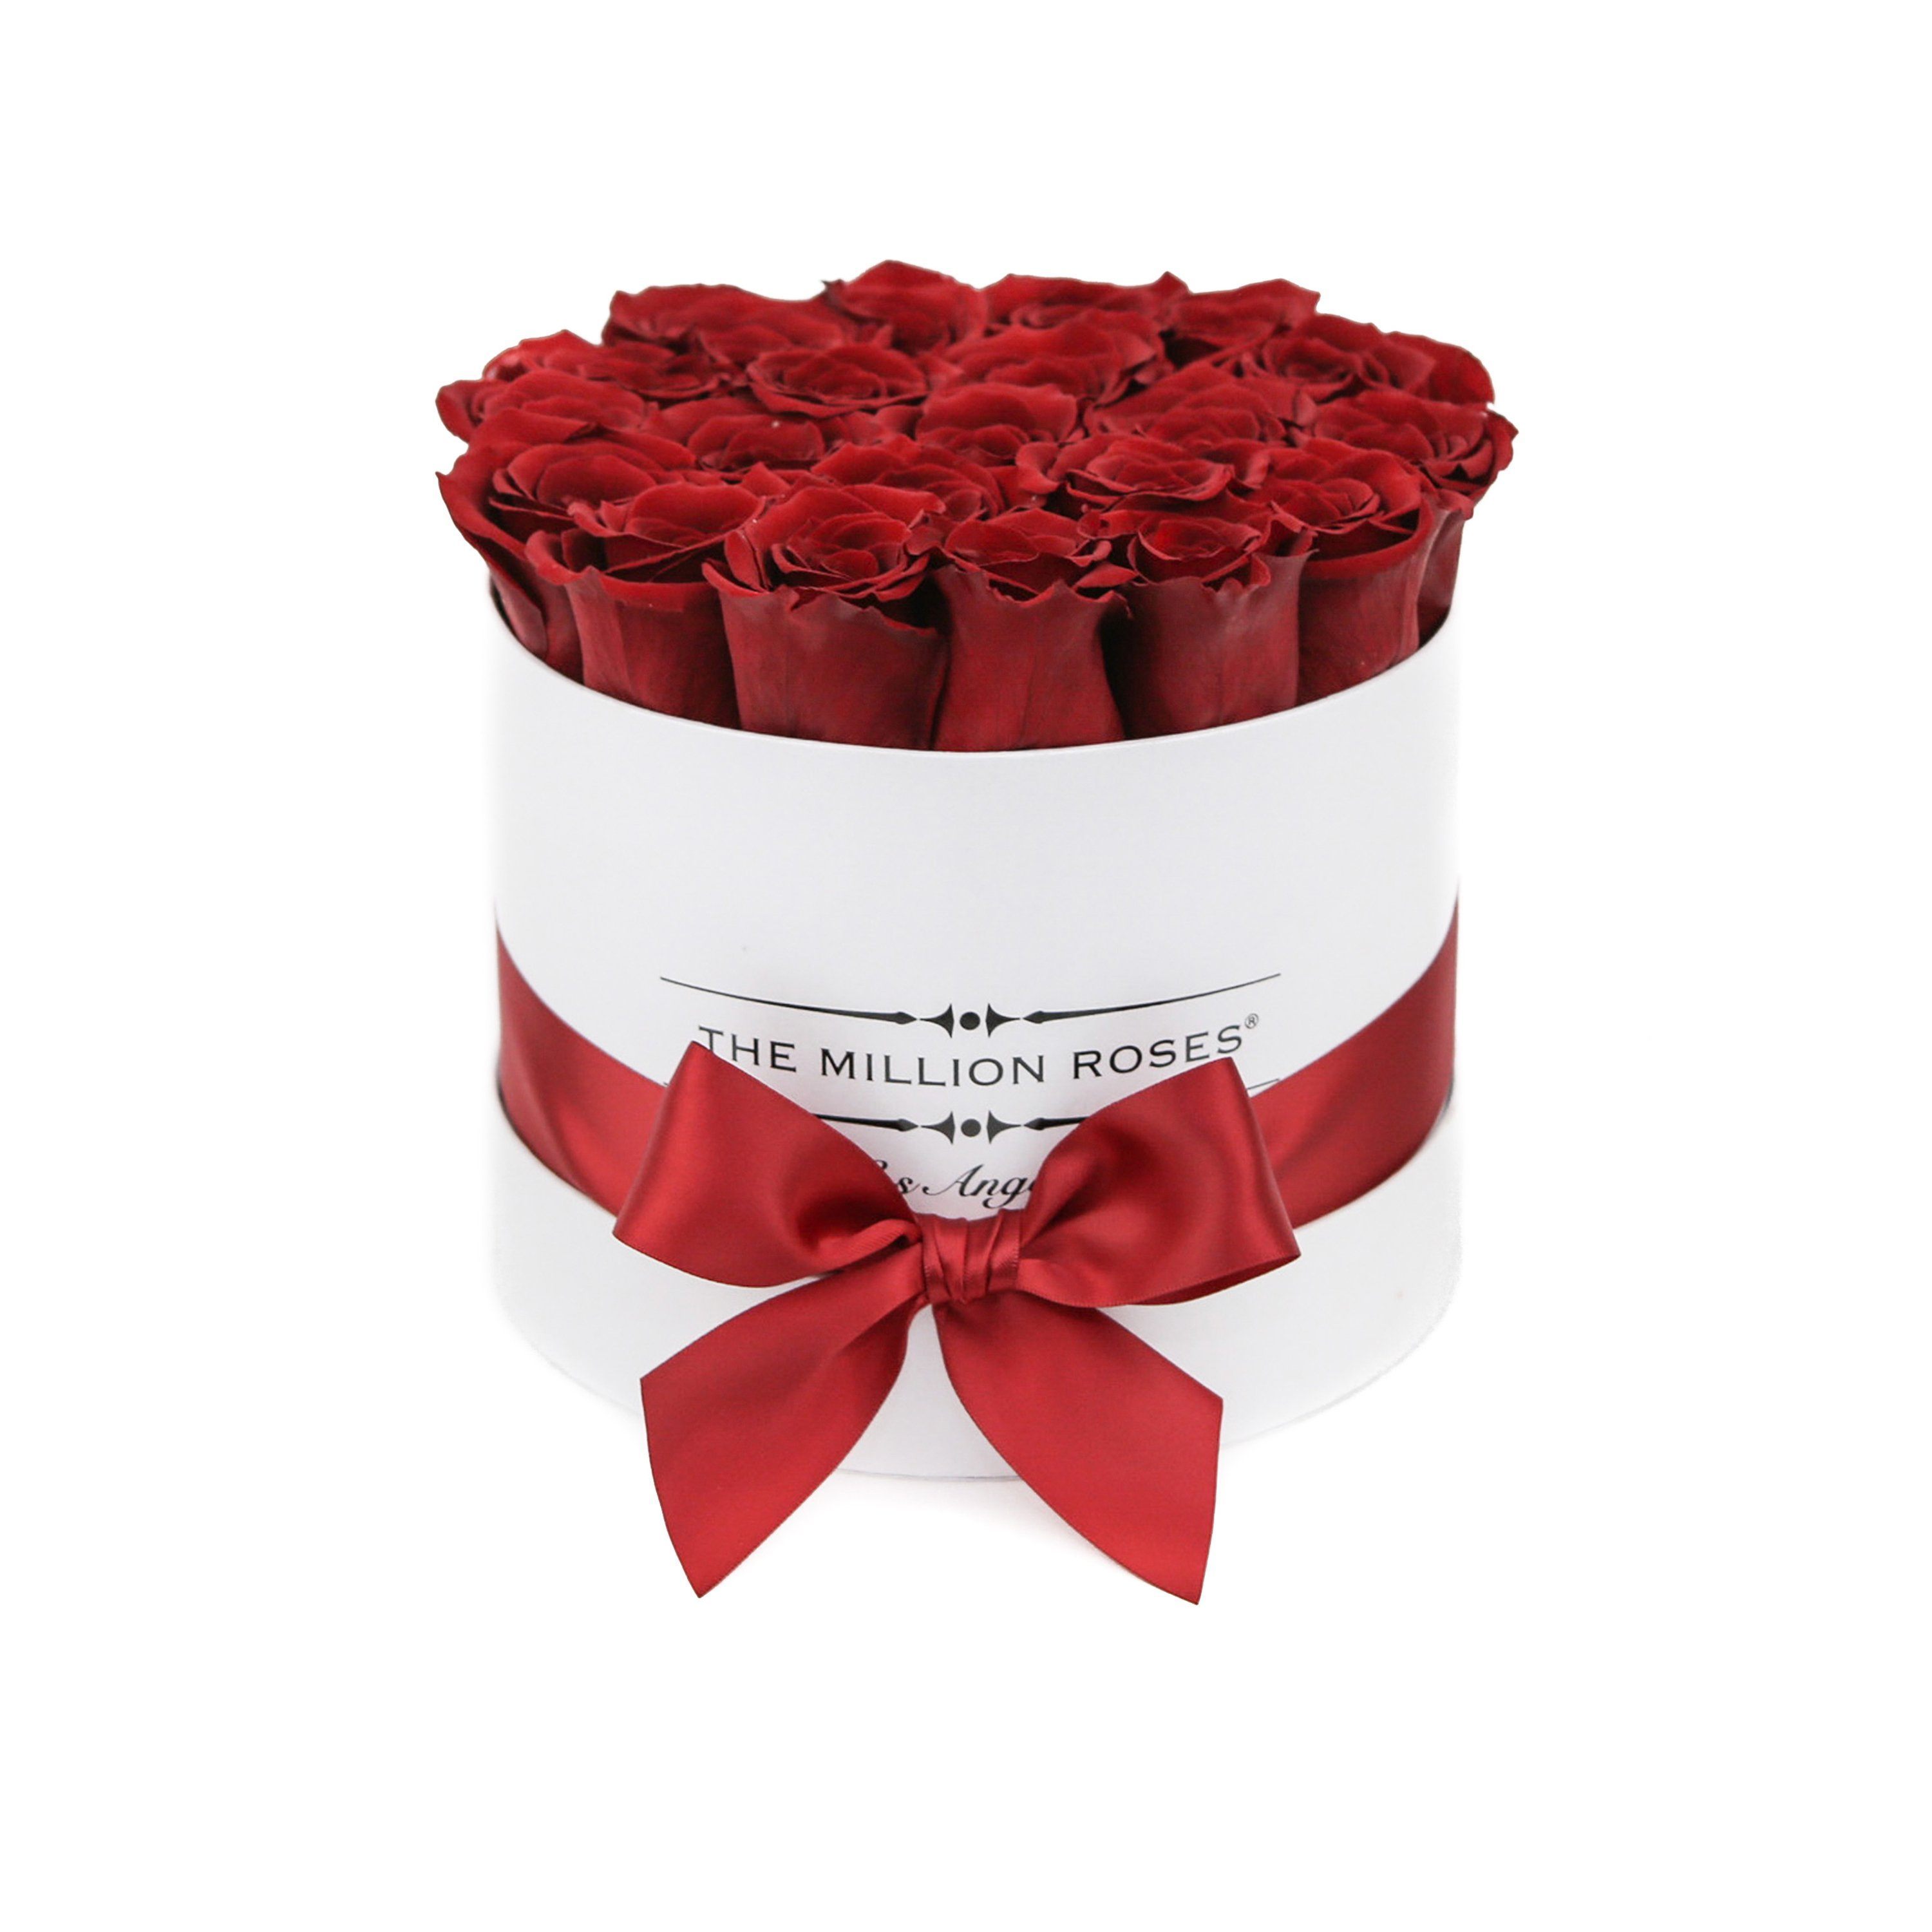 classic round box - white - red roses red eternity roses - the million roses